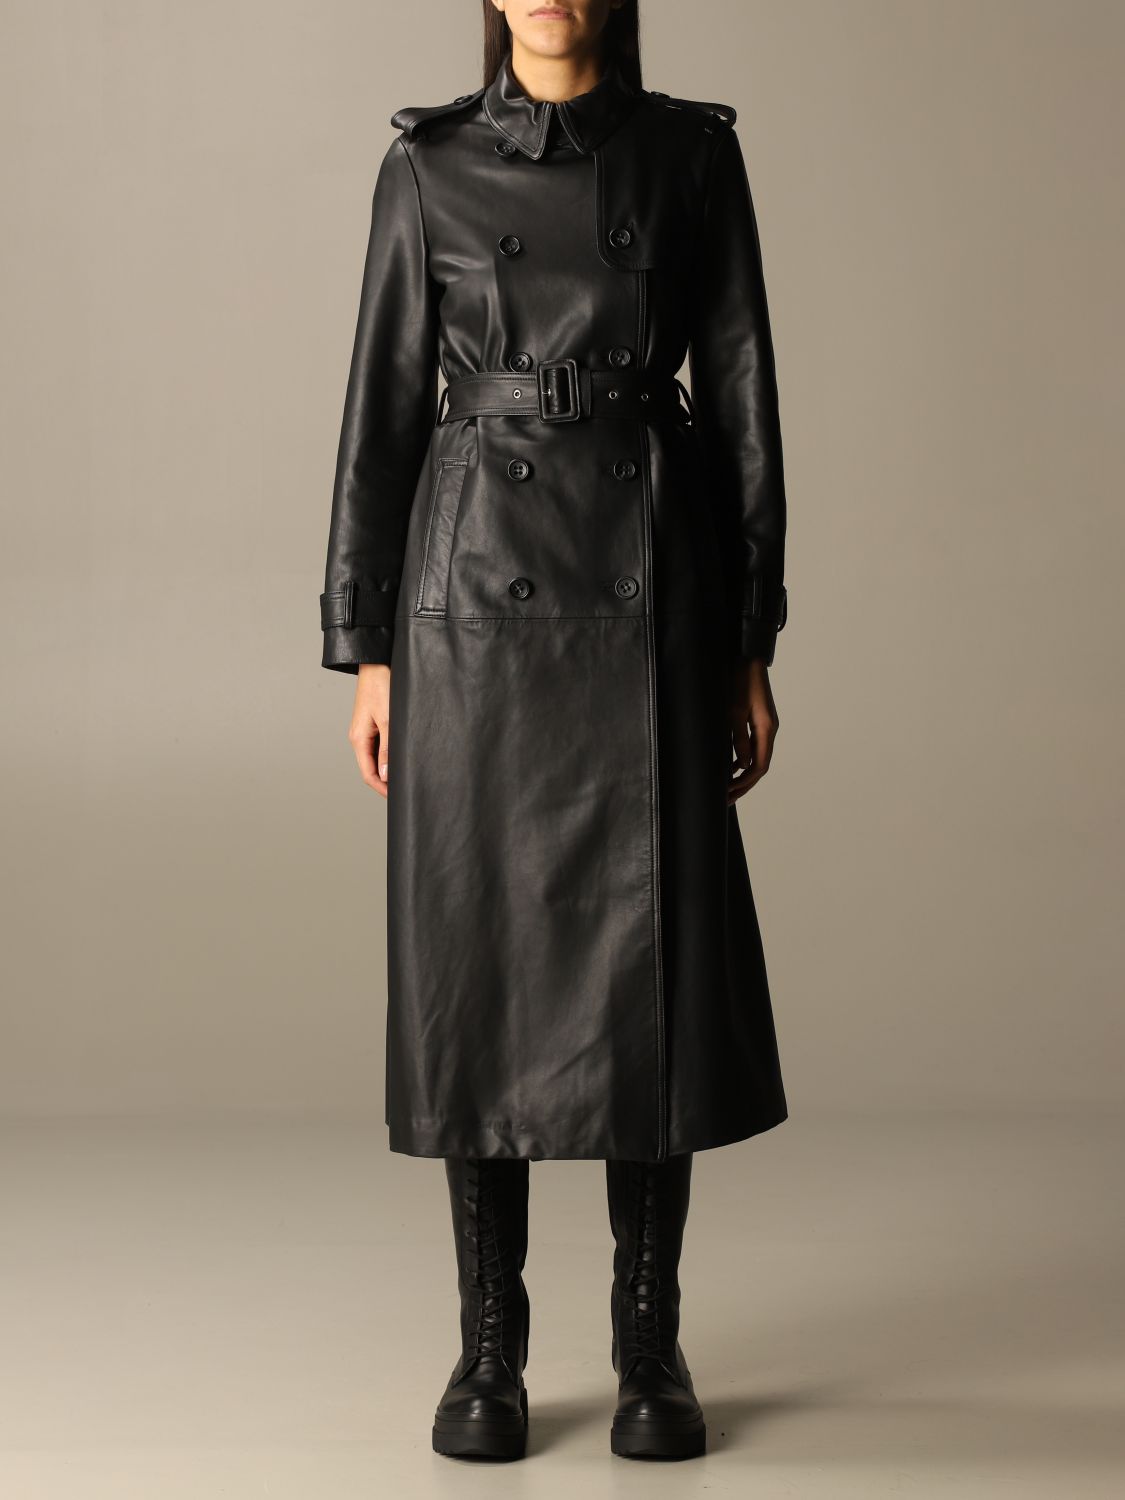 VALENTINO: long trench coat in leather with belt - | Valentino trench coat UR0NC00A 5HP online on